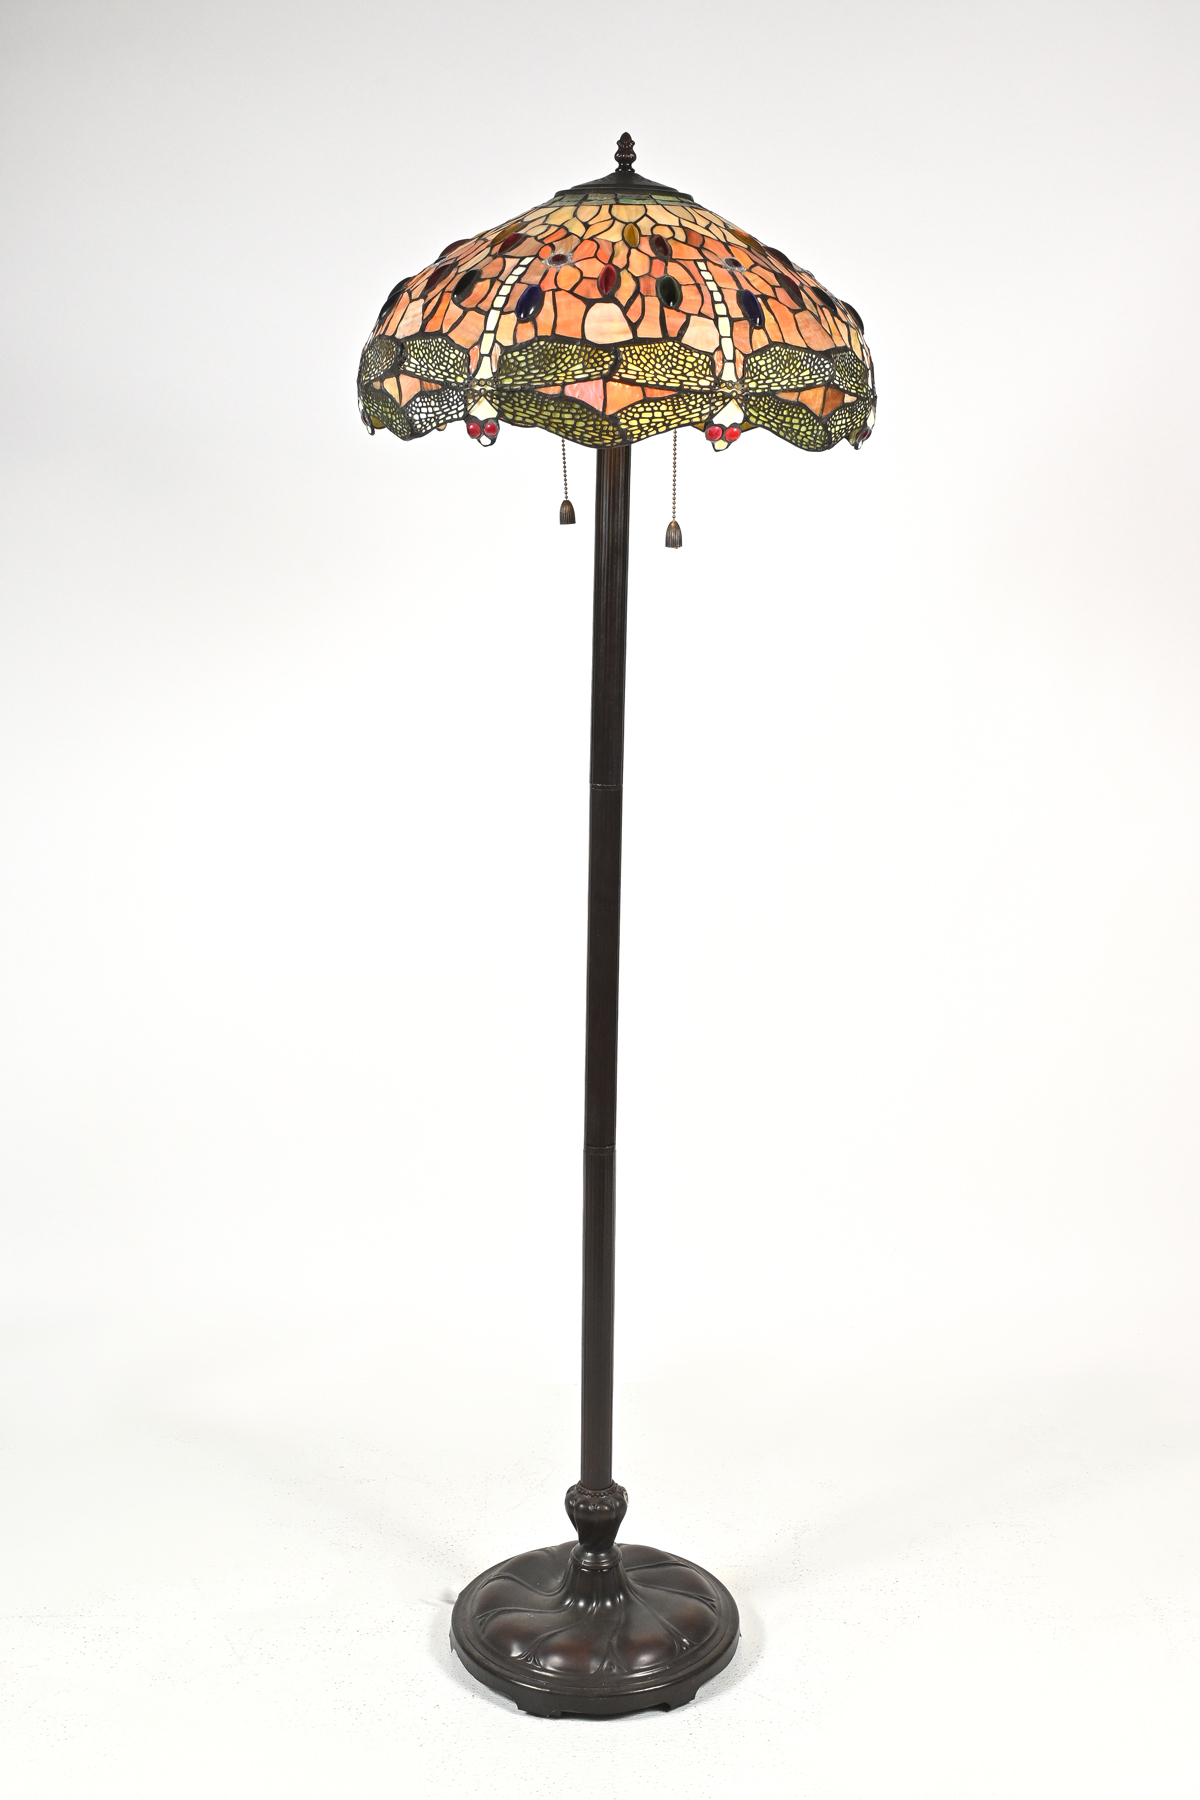 DRAGONFLY MOTIF STAINED FLOOR LAMP: